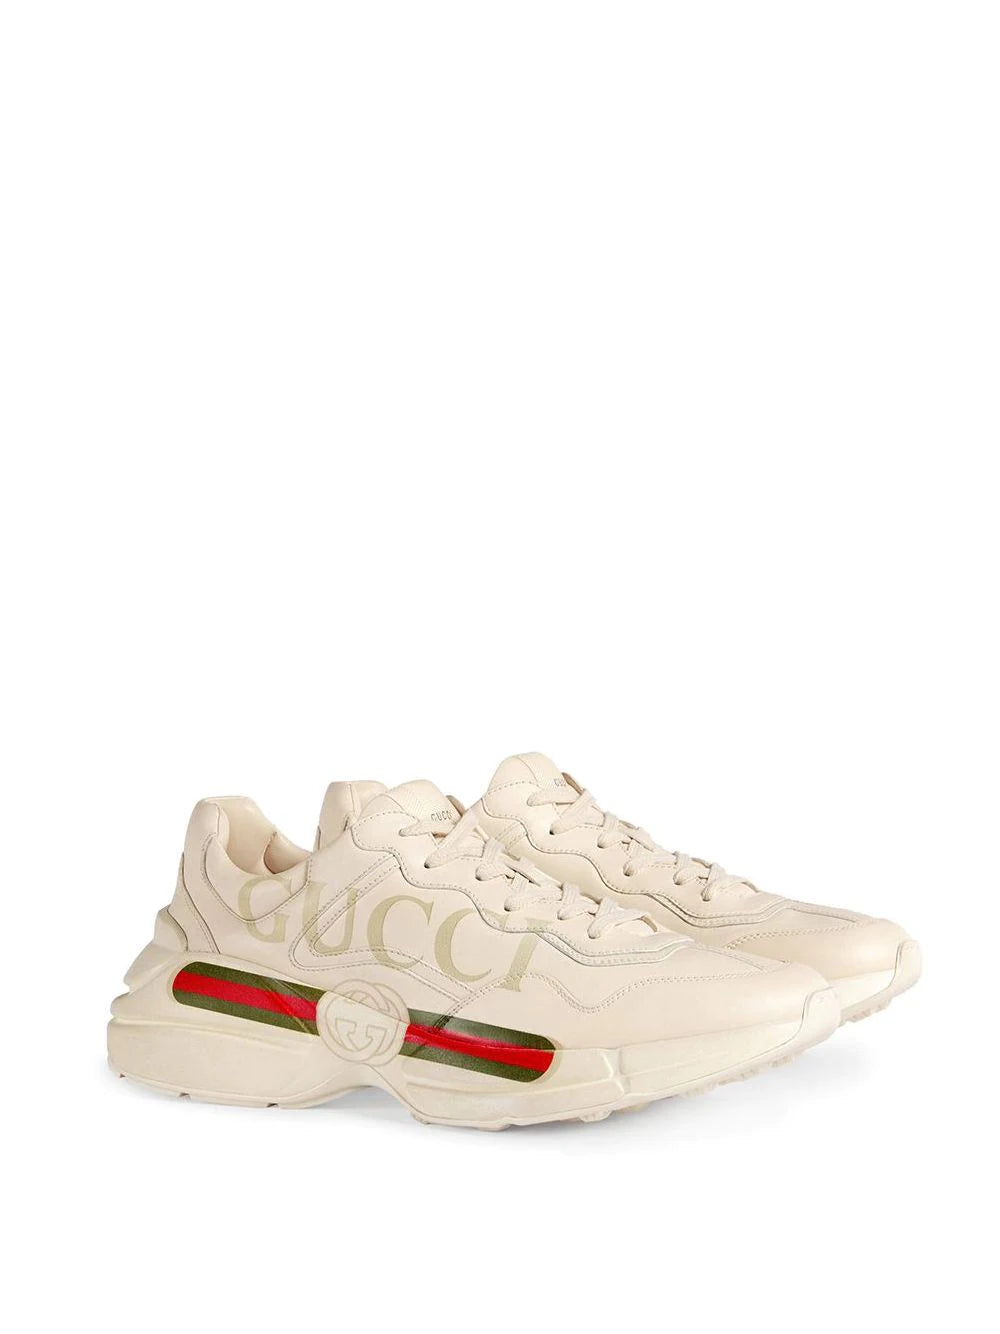 Gucci Rhyton-logo leather sneakers